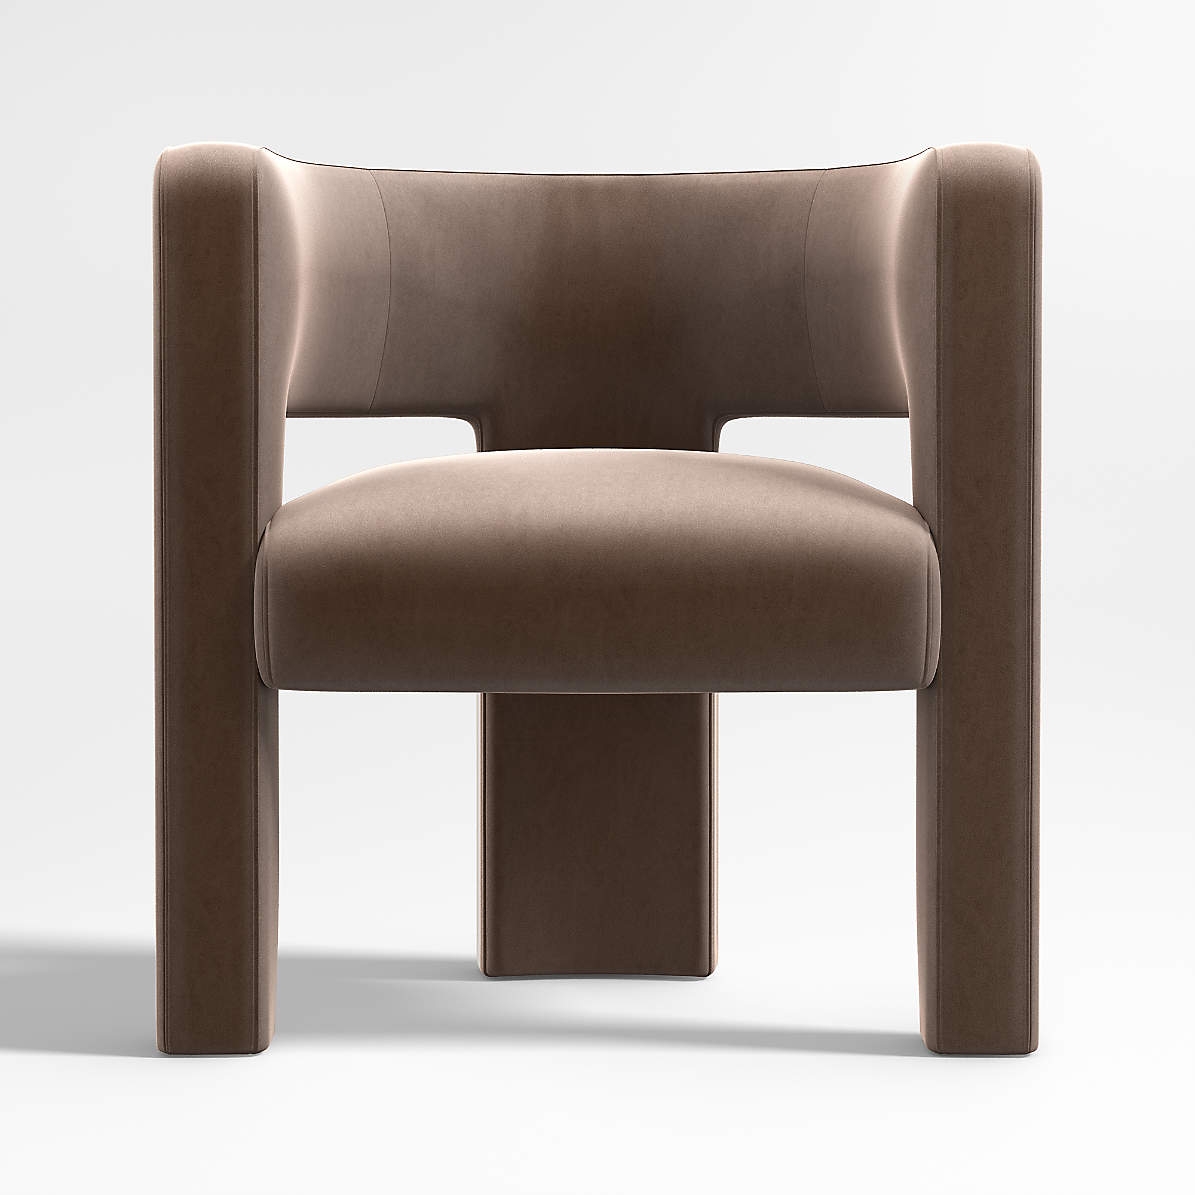 Sculpt Chair - Variety Stone - Image 0